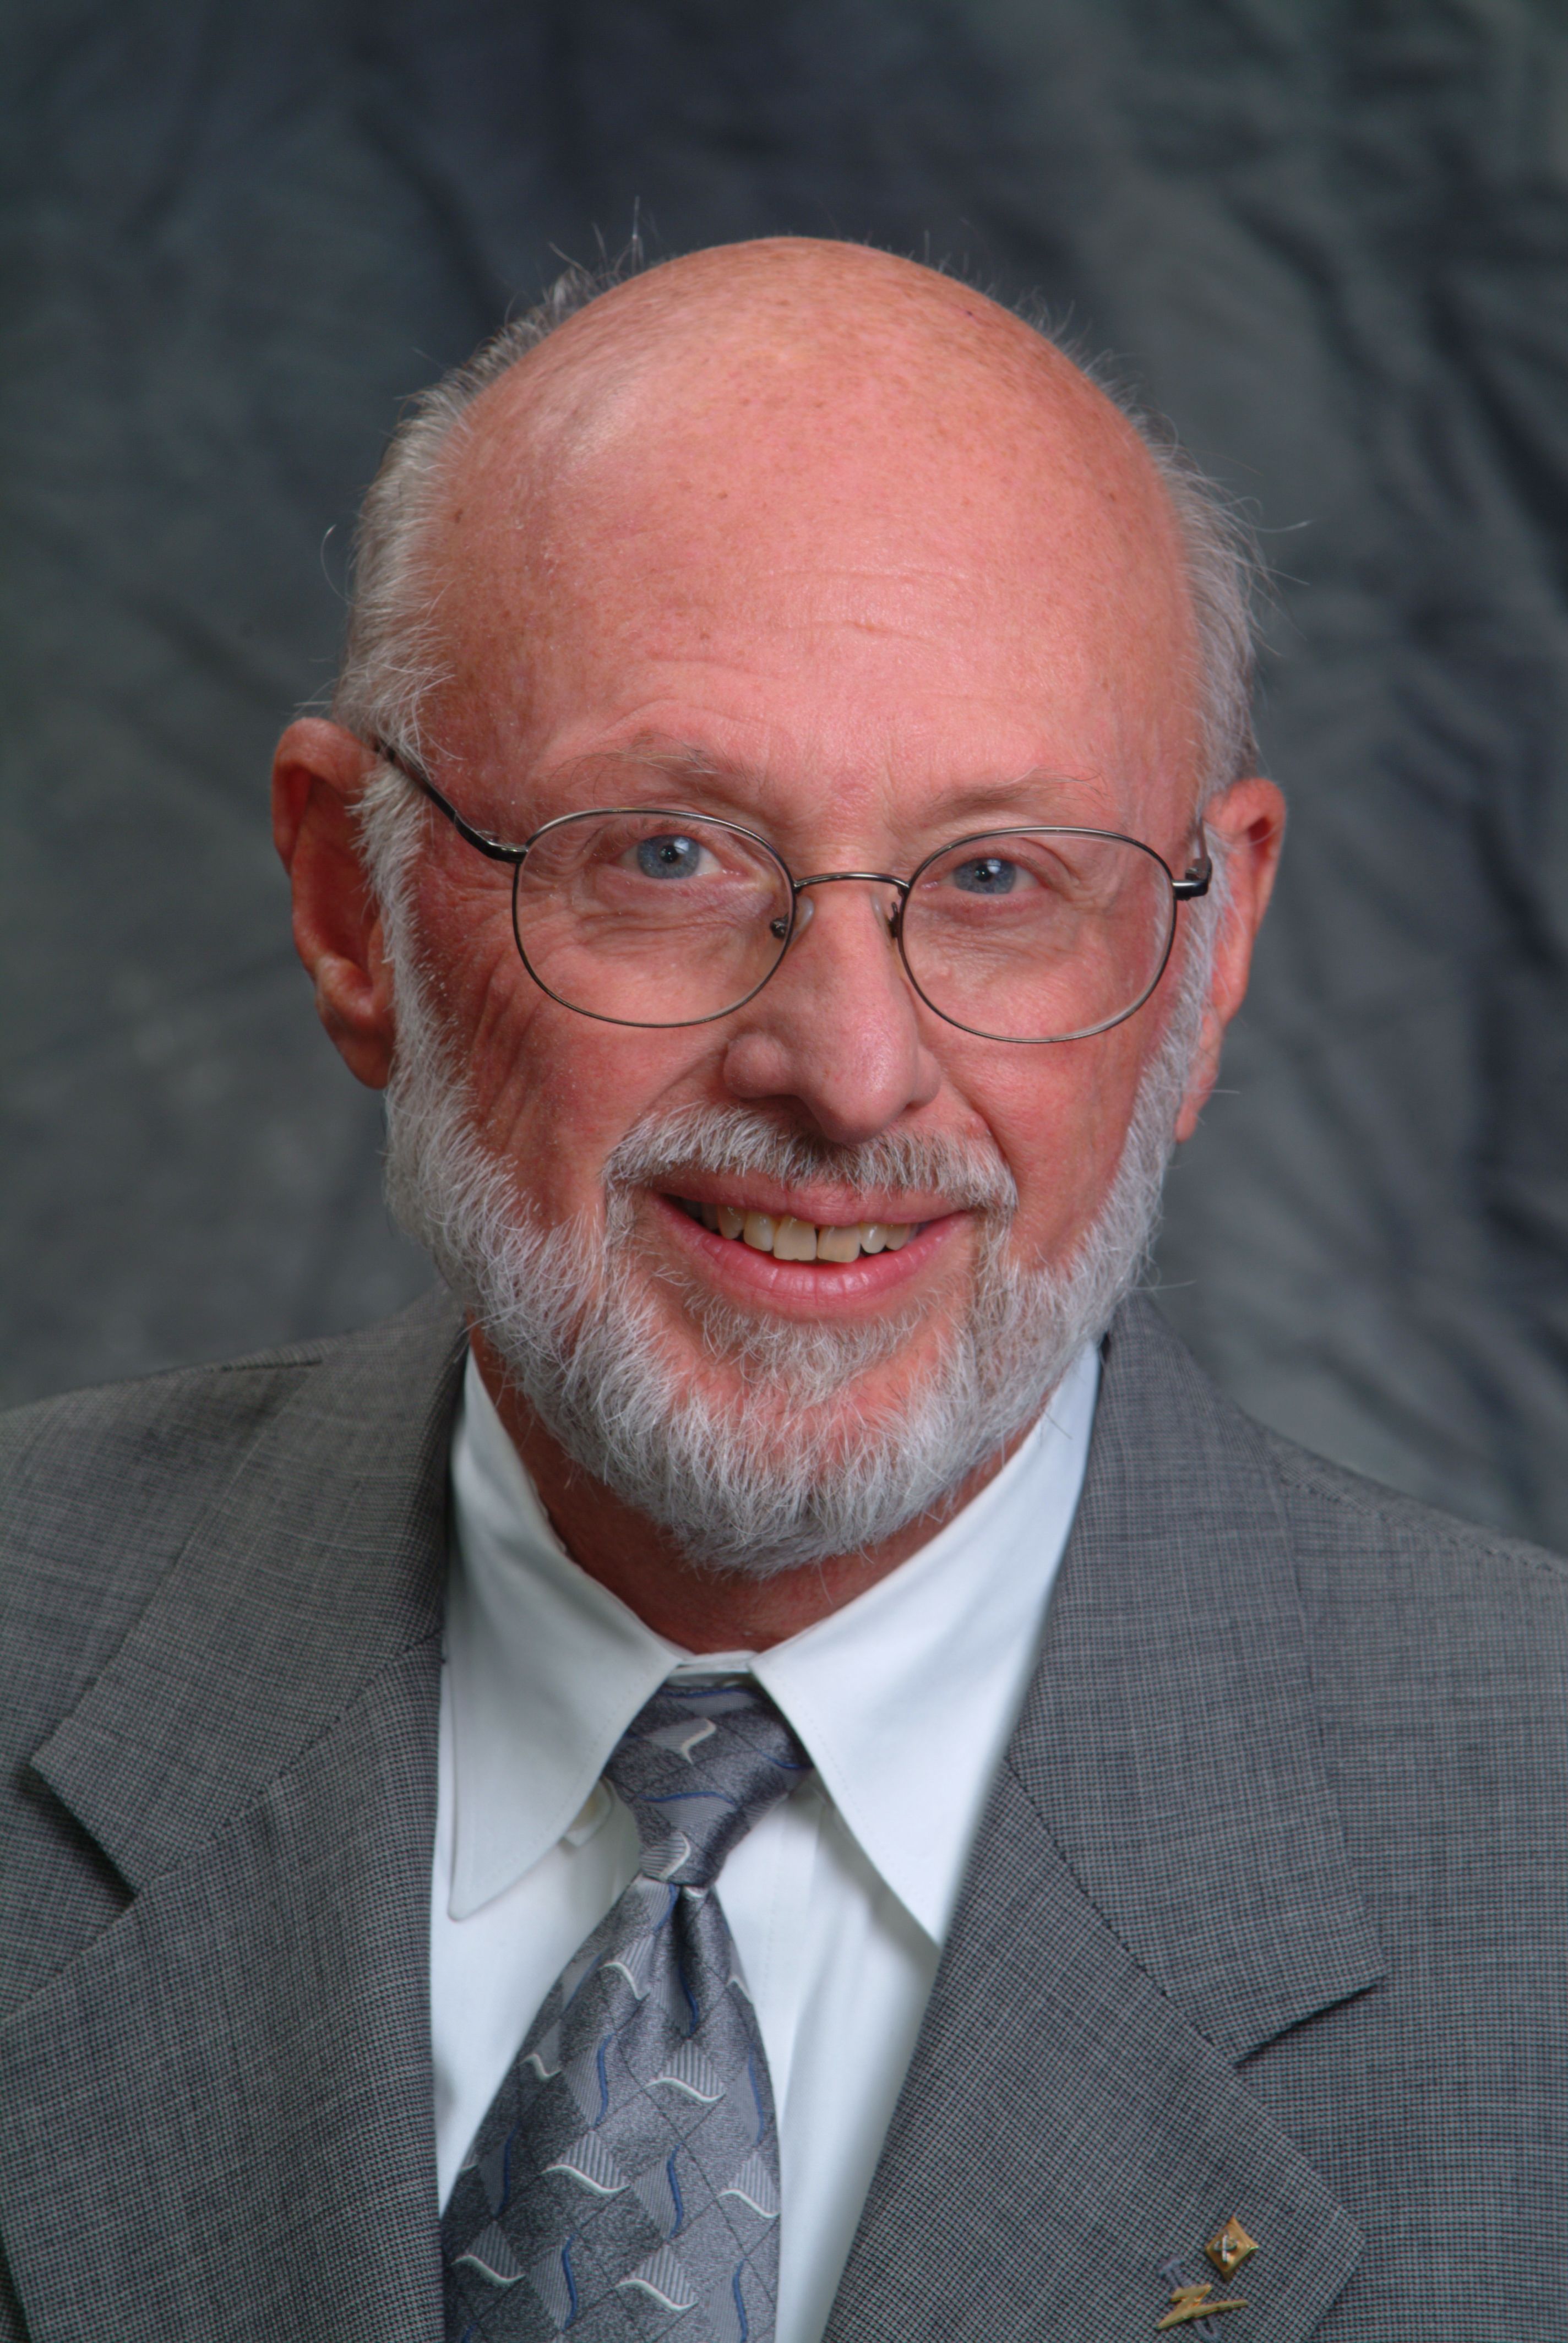 Wayne  Luplow - Fellows Chair, BTS Committee on Communications Policy Representative portrait